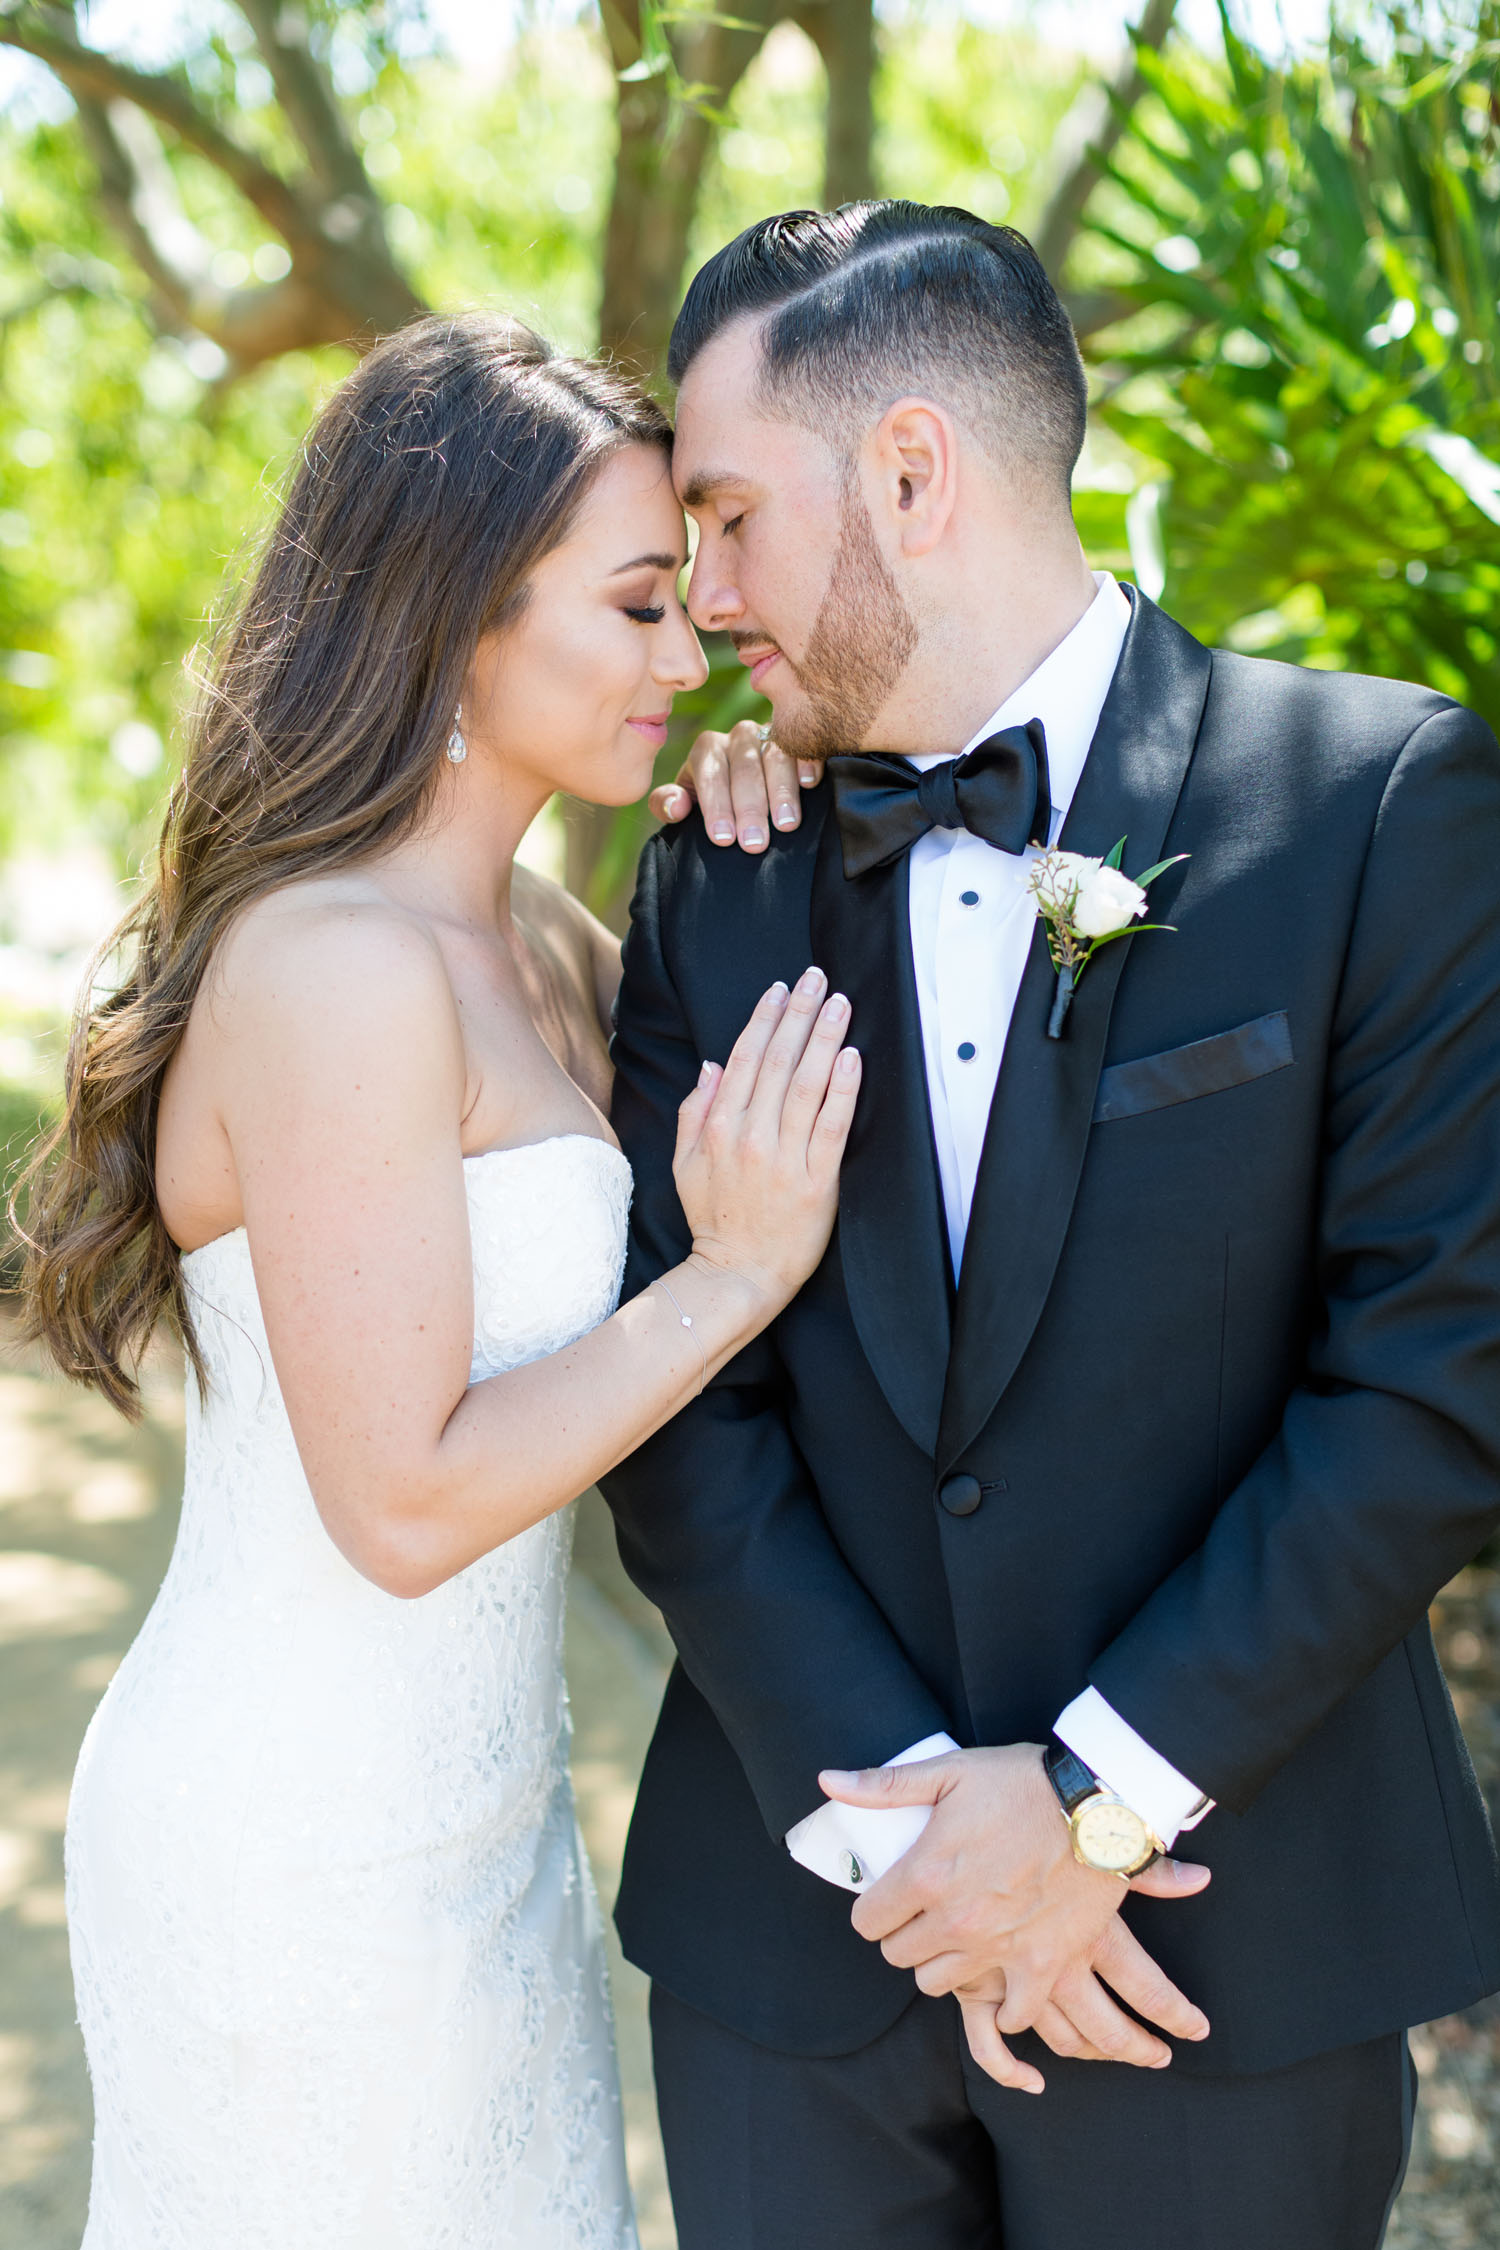 bride and groom touching foreheads with eyes closed